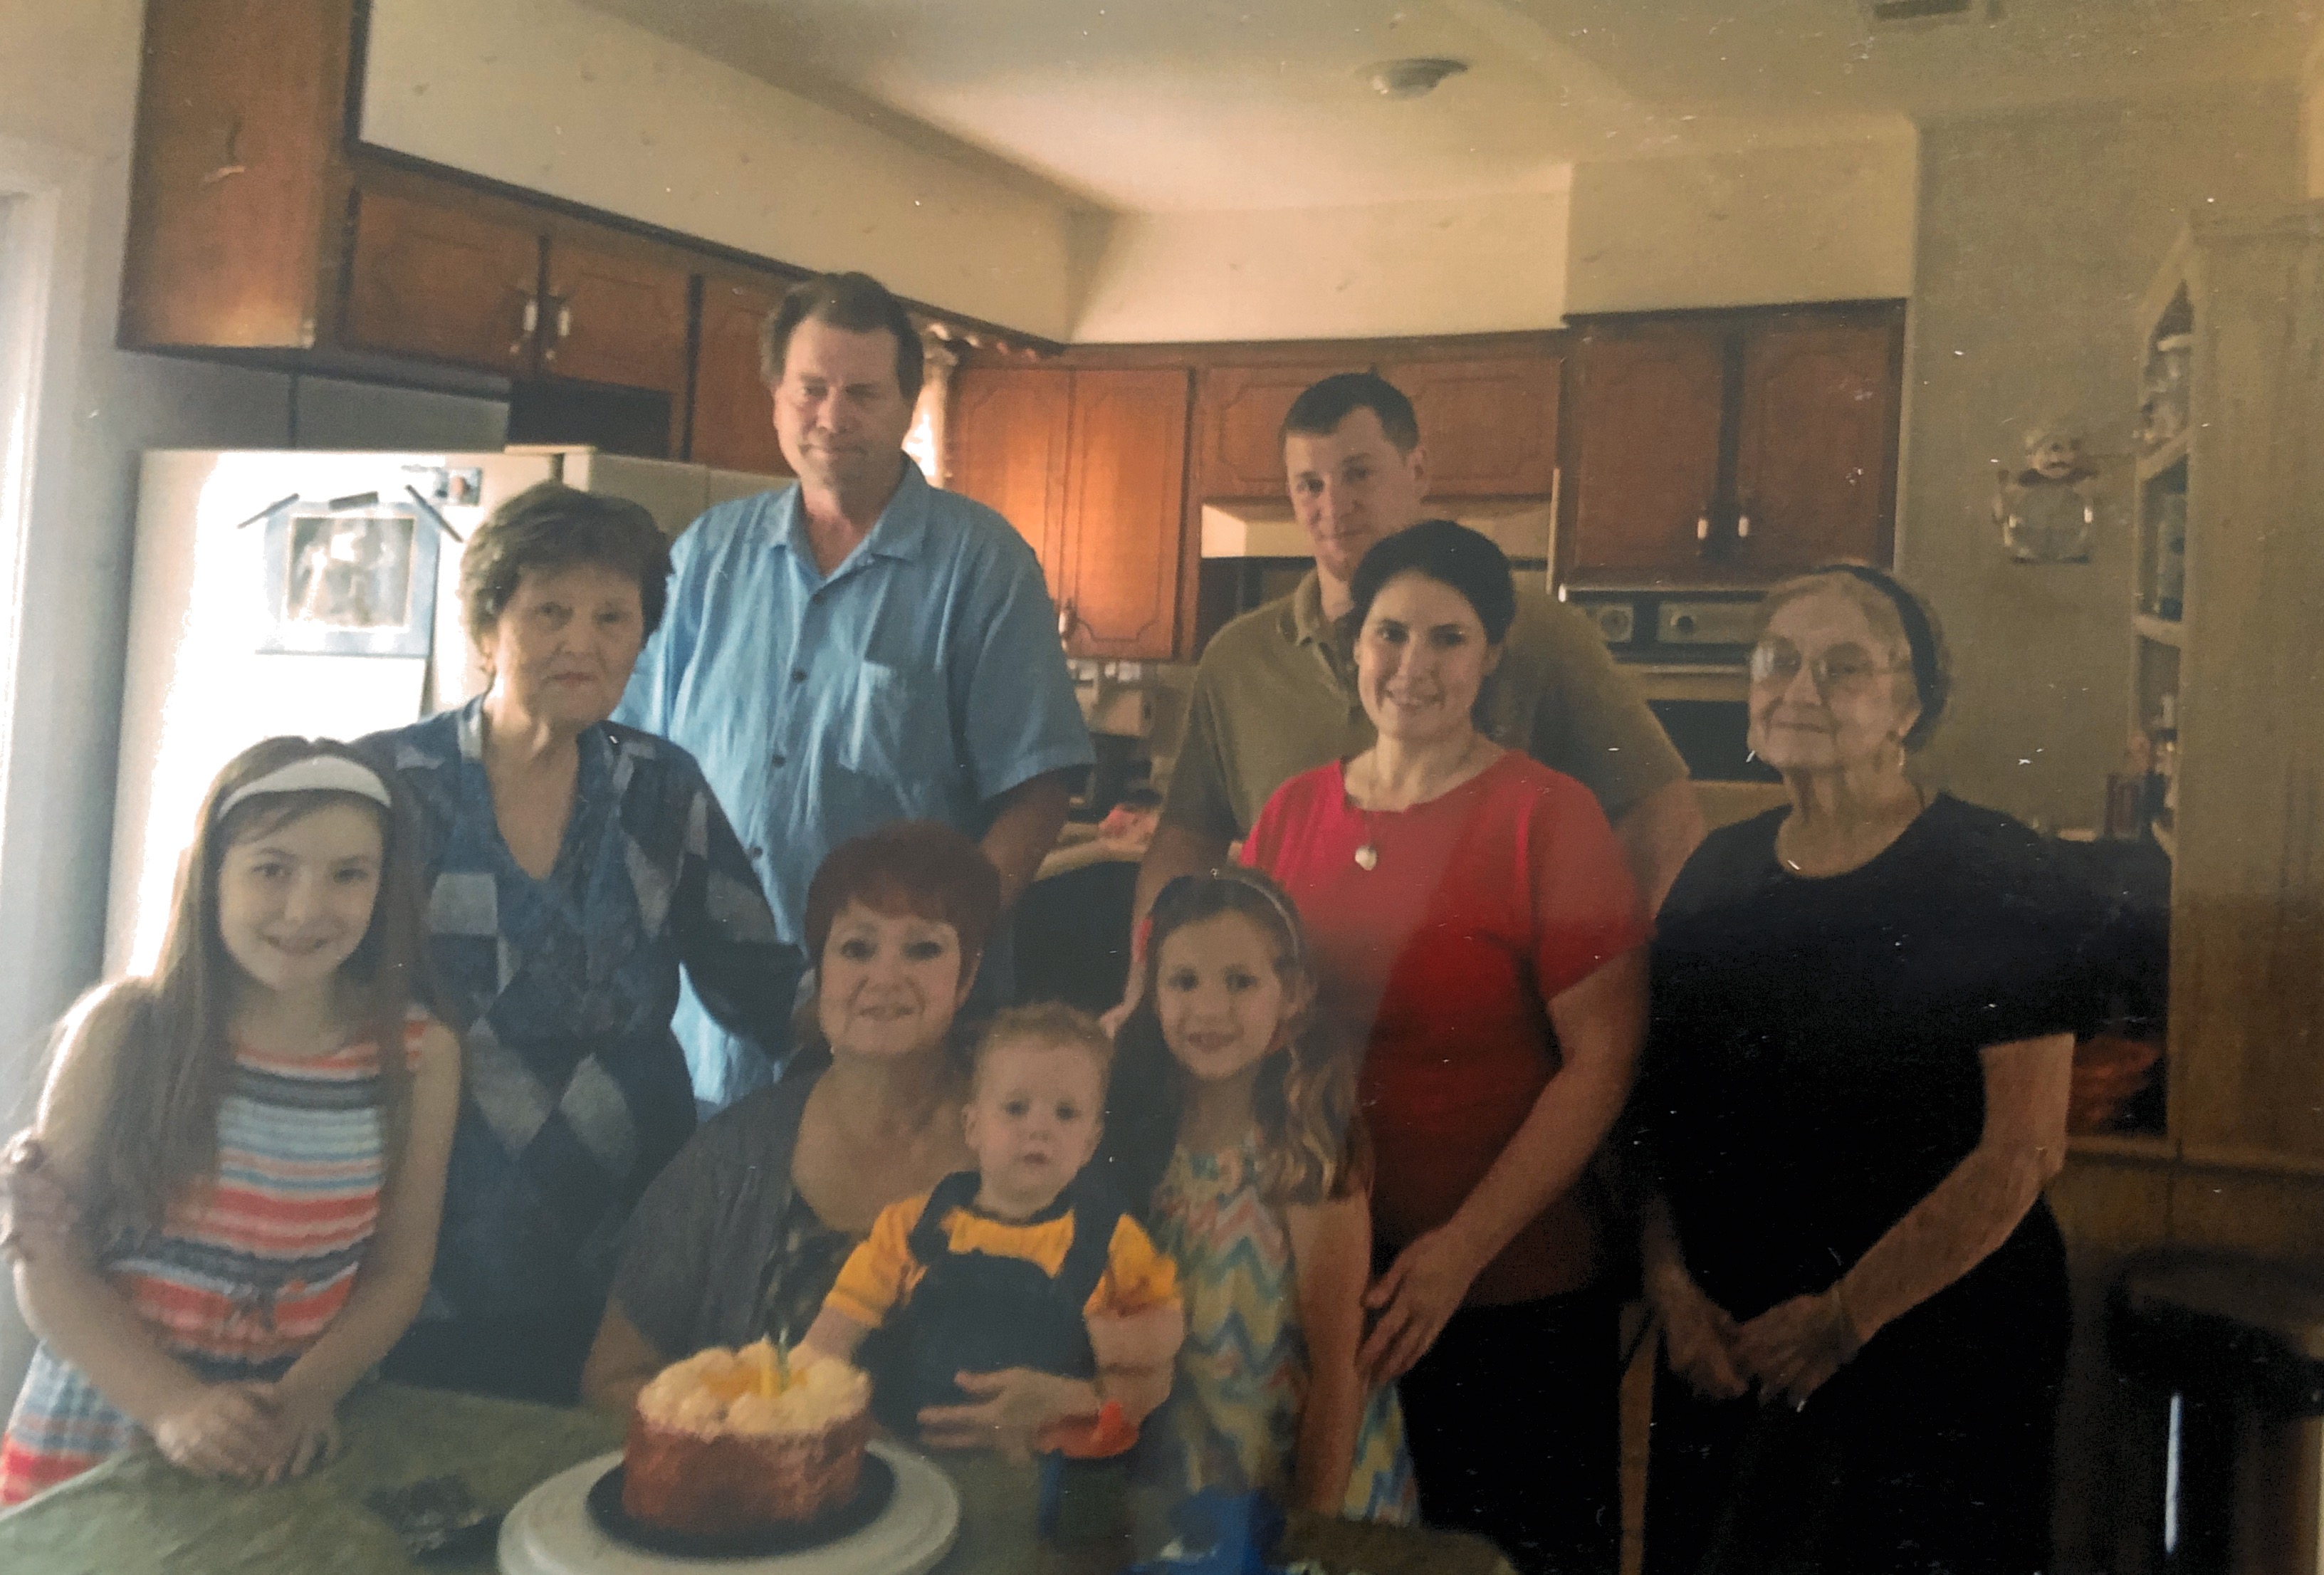 My Birthday at Lillian‘s house in 2015